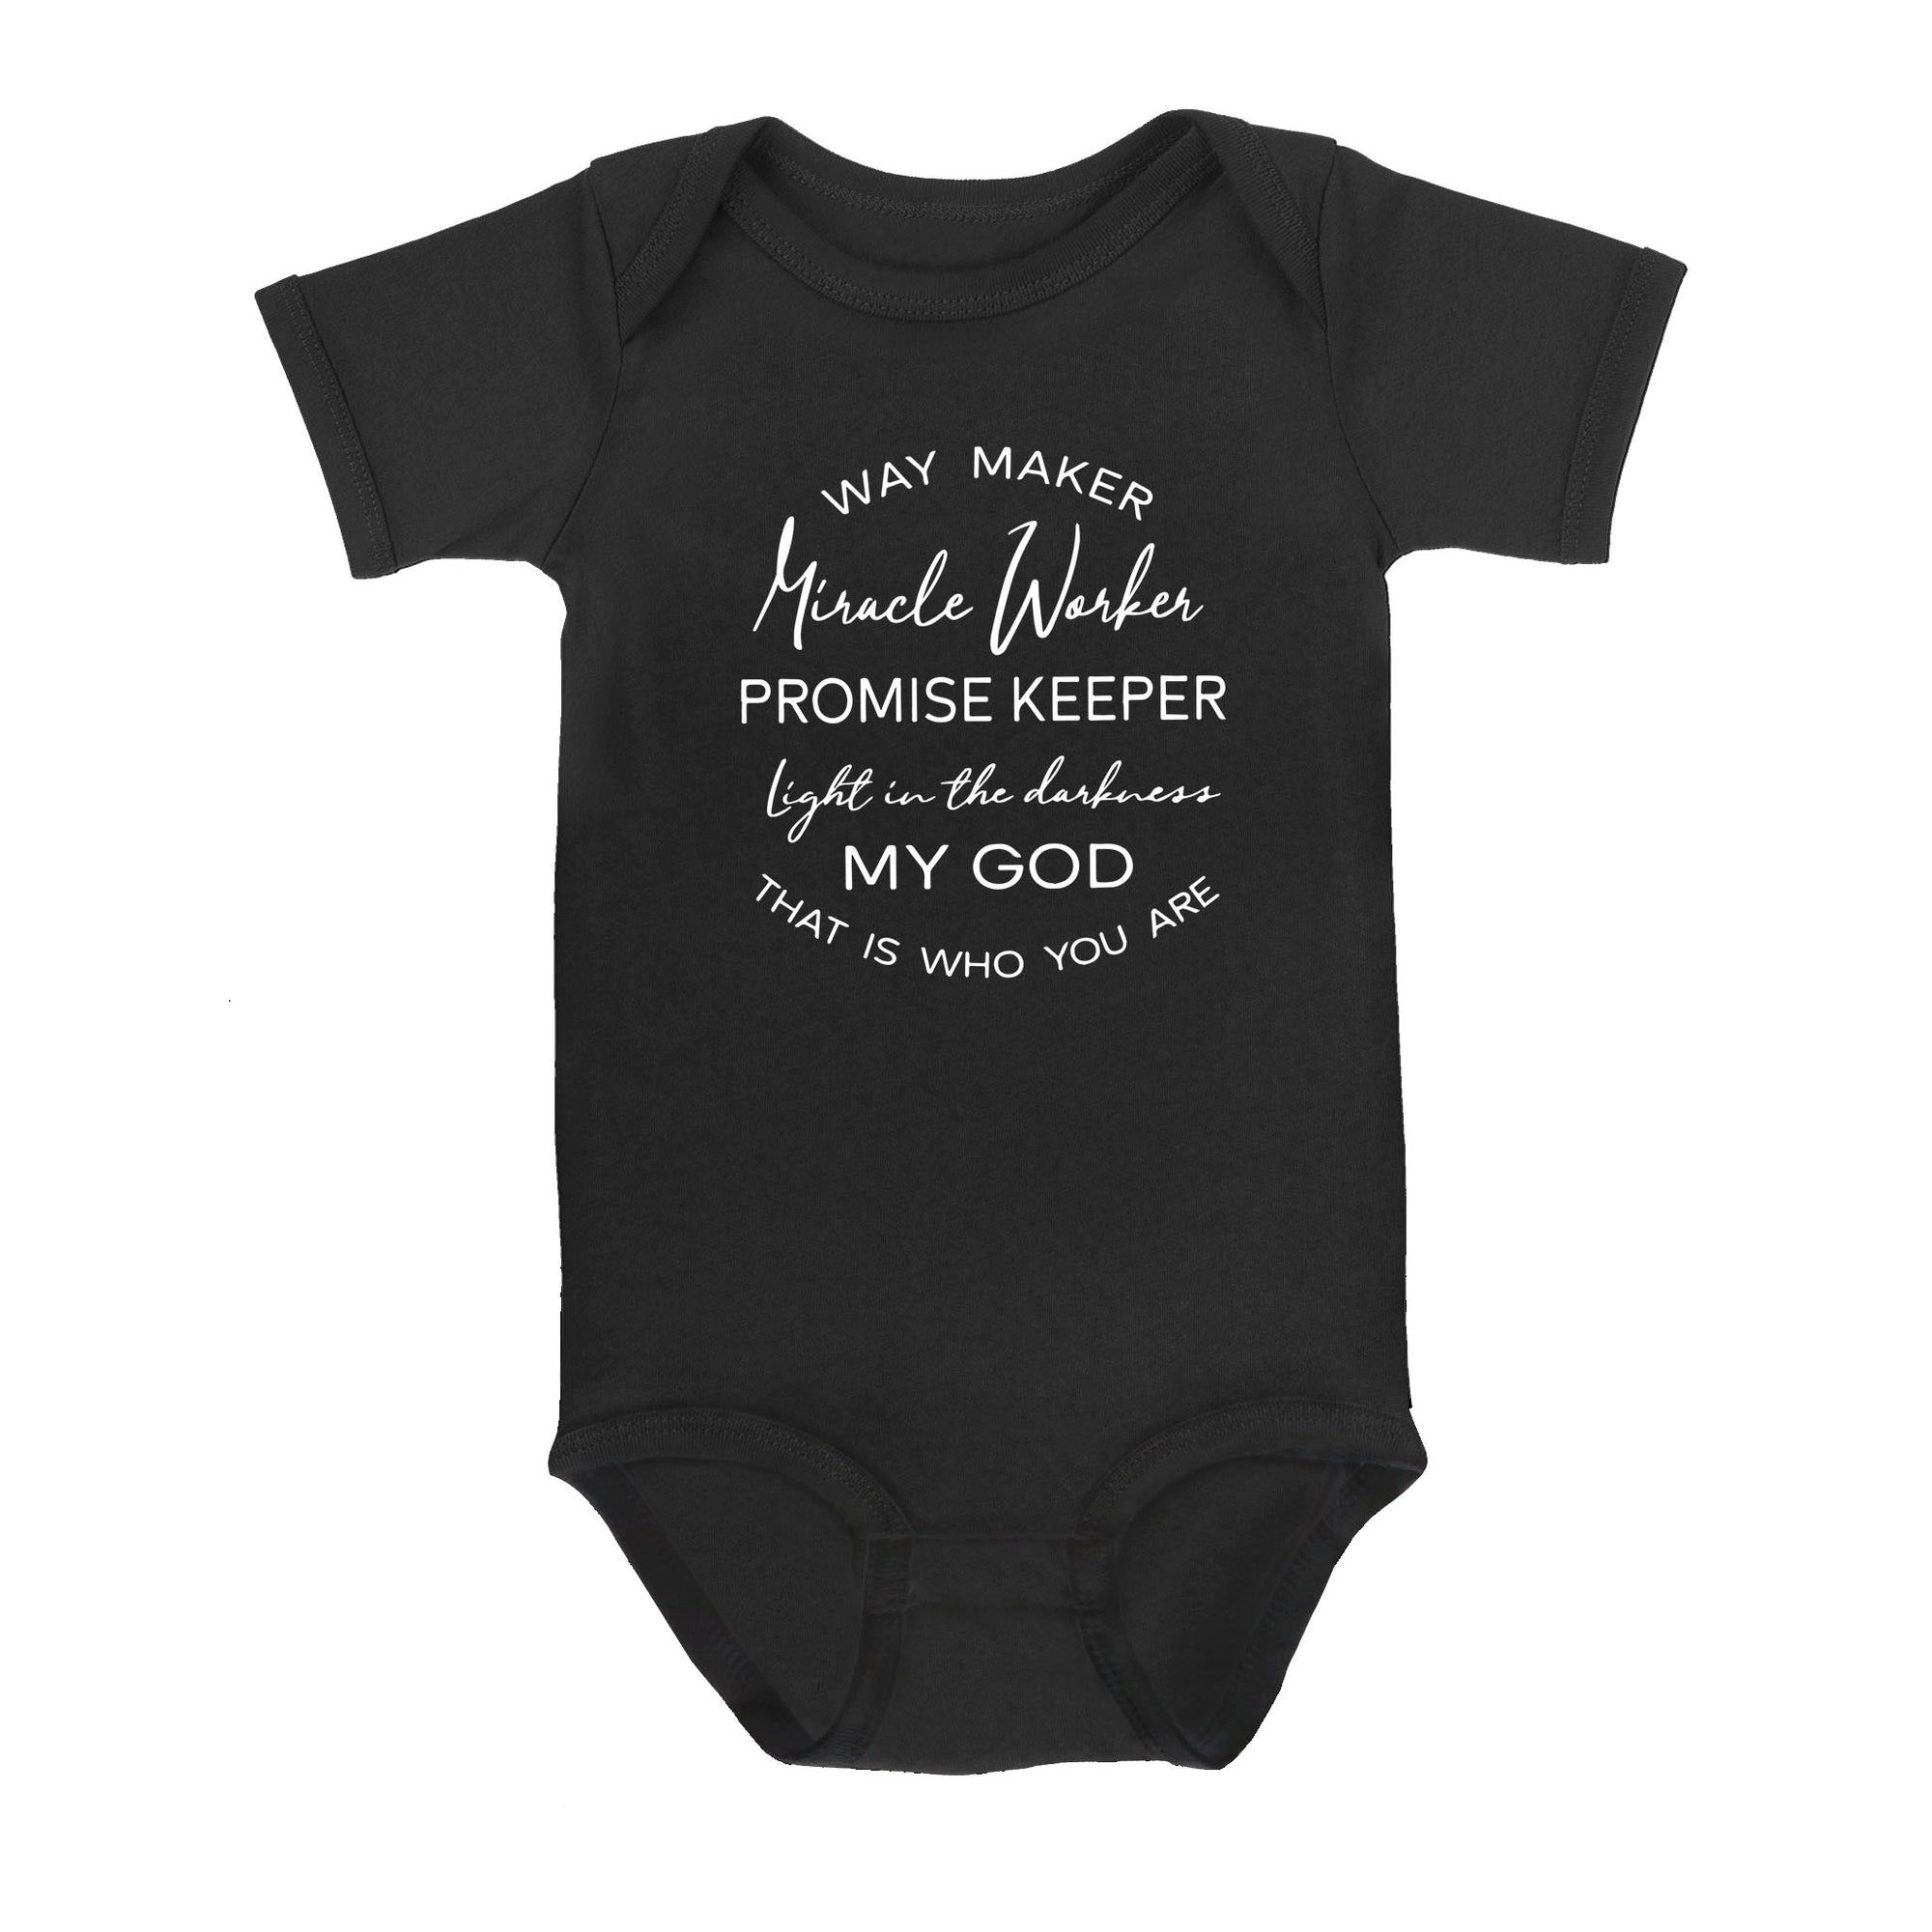 Way Maker Miracle Worker Promise Keeper Light In The Darkness My God That Is Who You Are - Baby Onesie